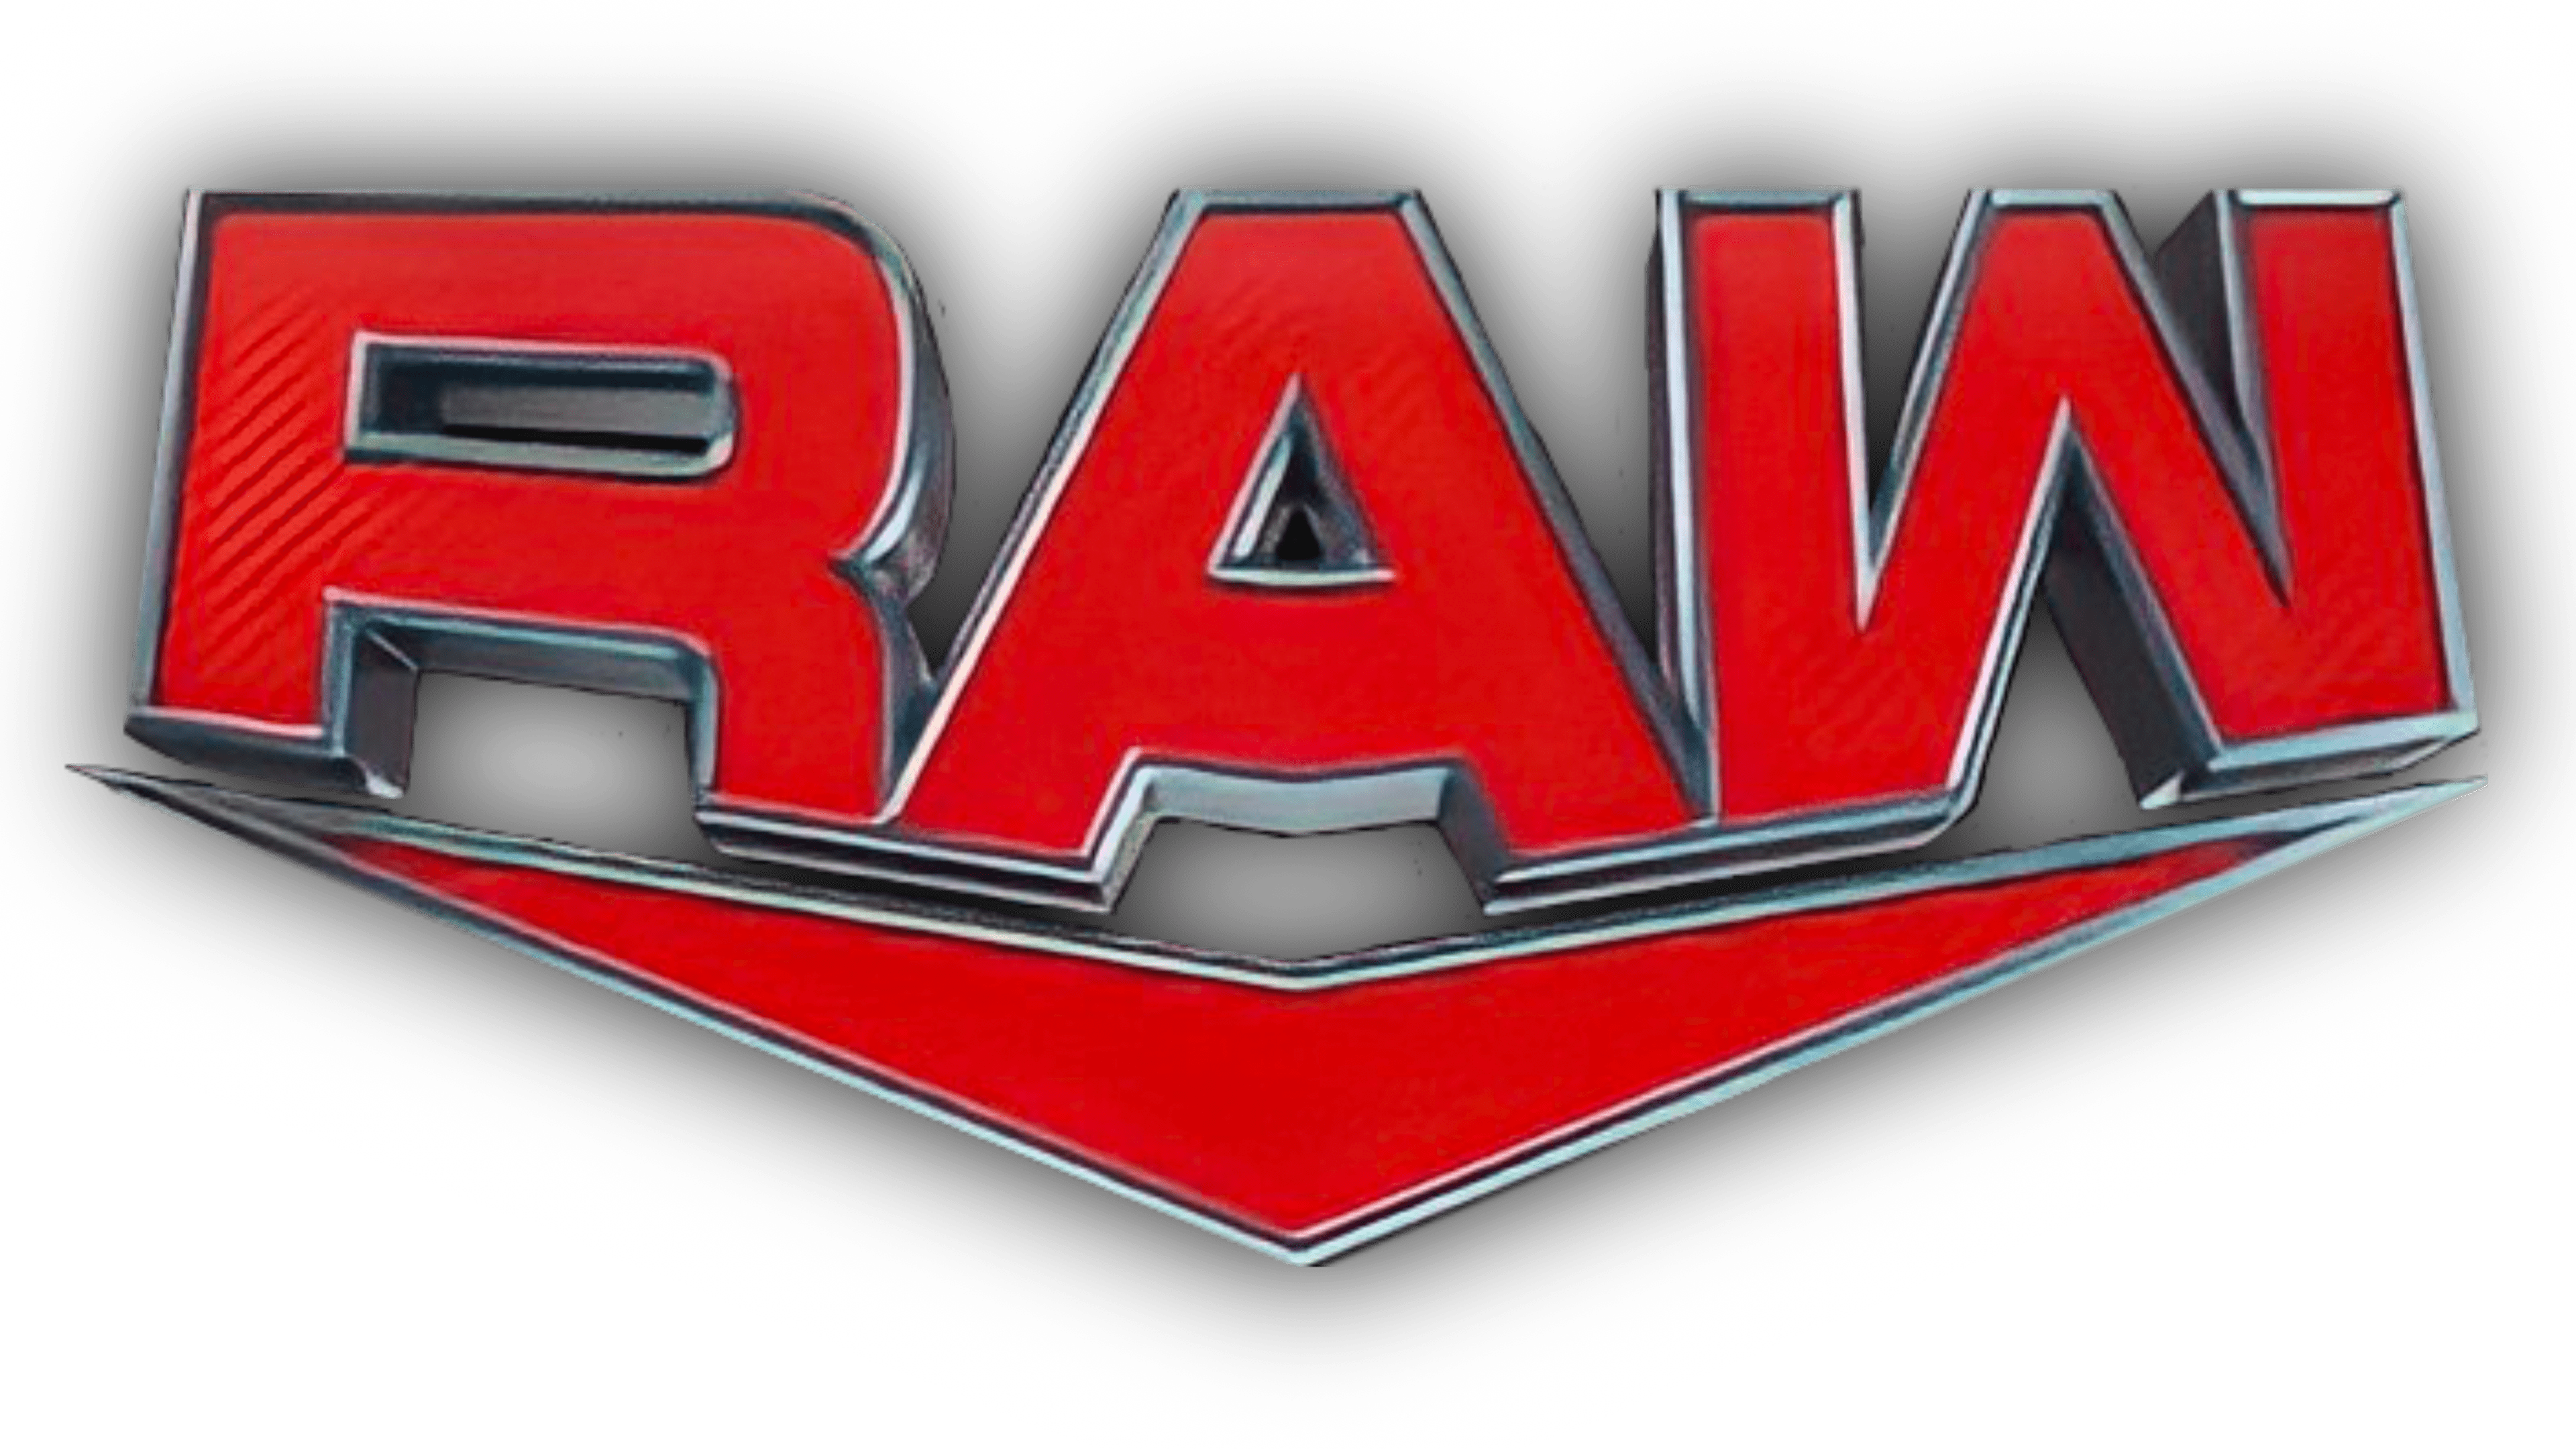 Announcement of Exciting New Segment in Upcoming WWE RAW Episode on Monday